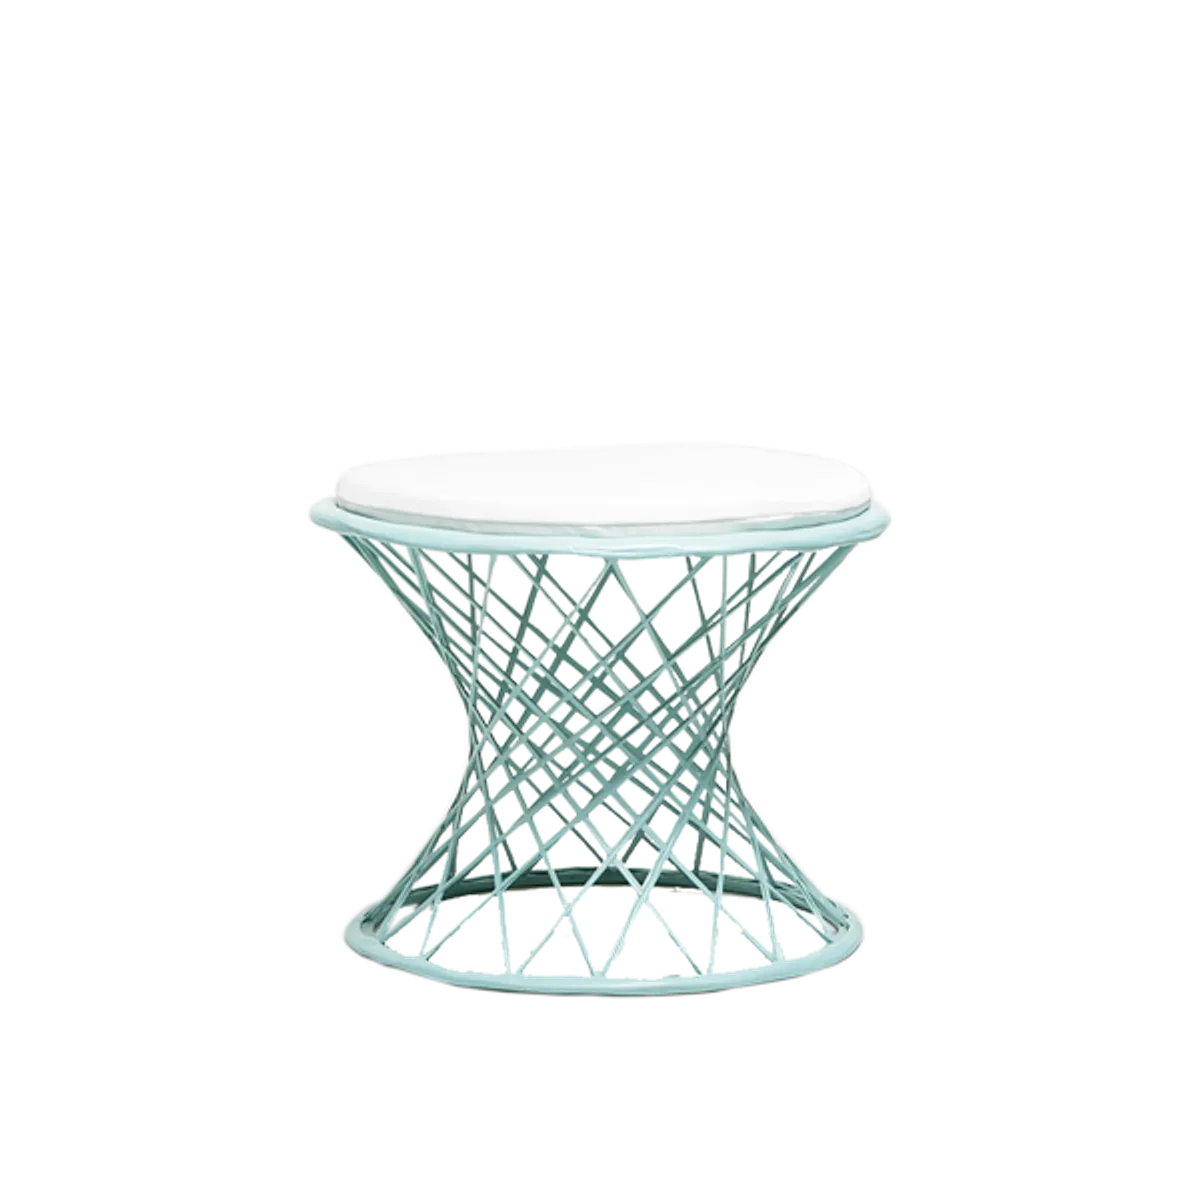 Web Cacti Stool Outdoor Furniture For Hotels Spas And Healthcare By Insideoutcontracts